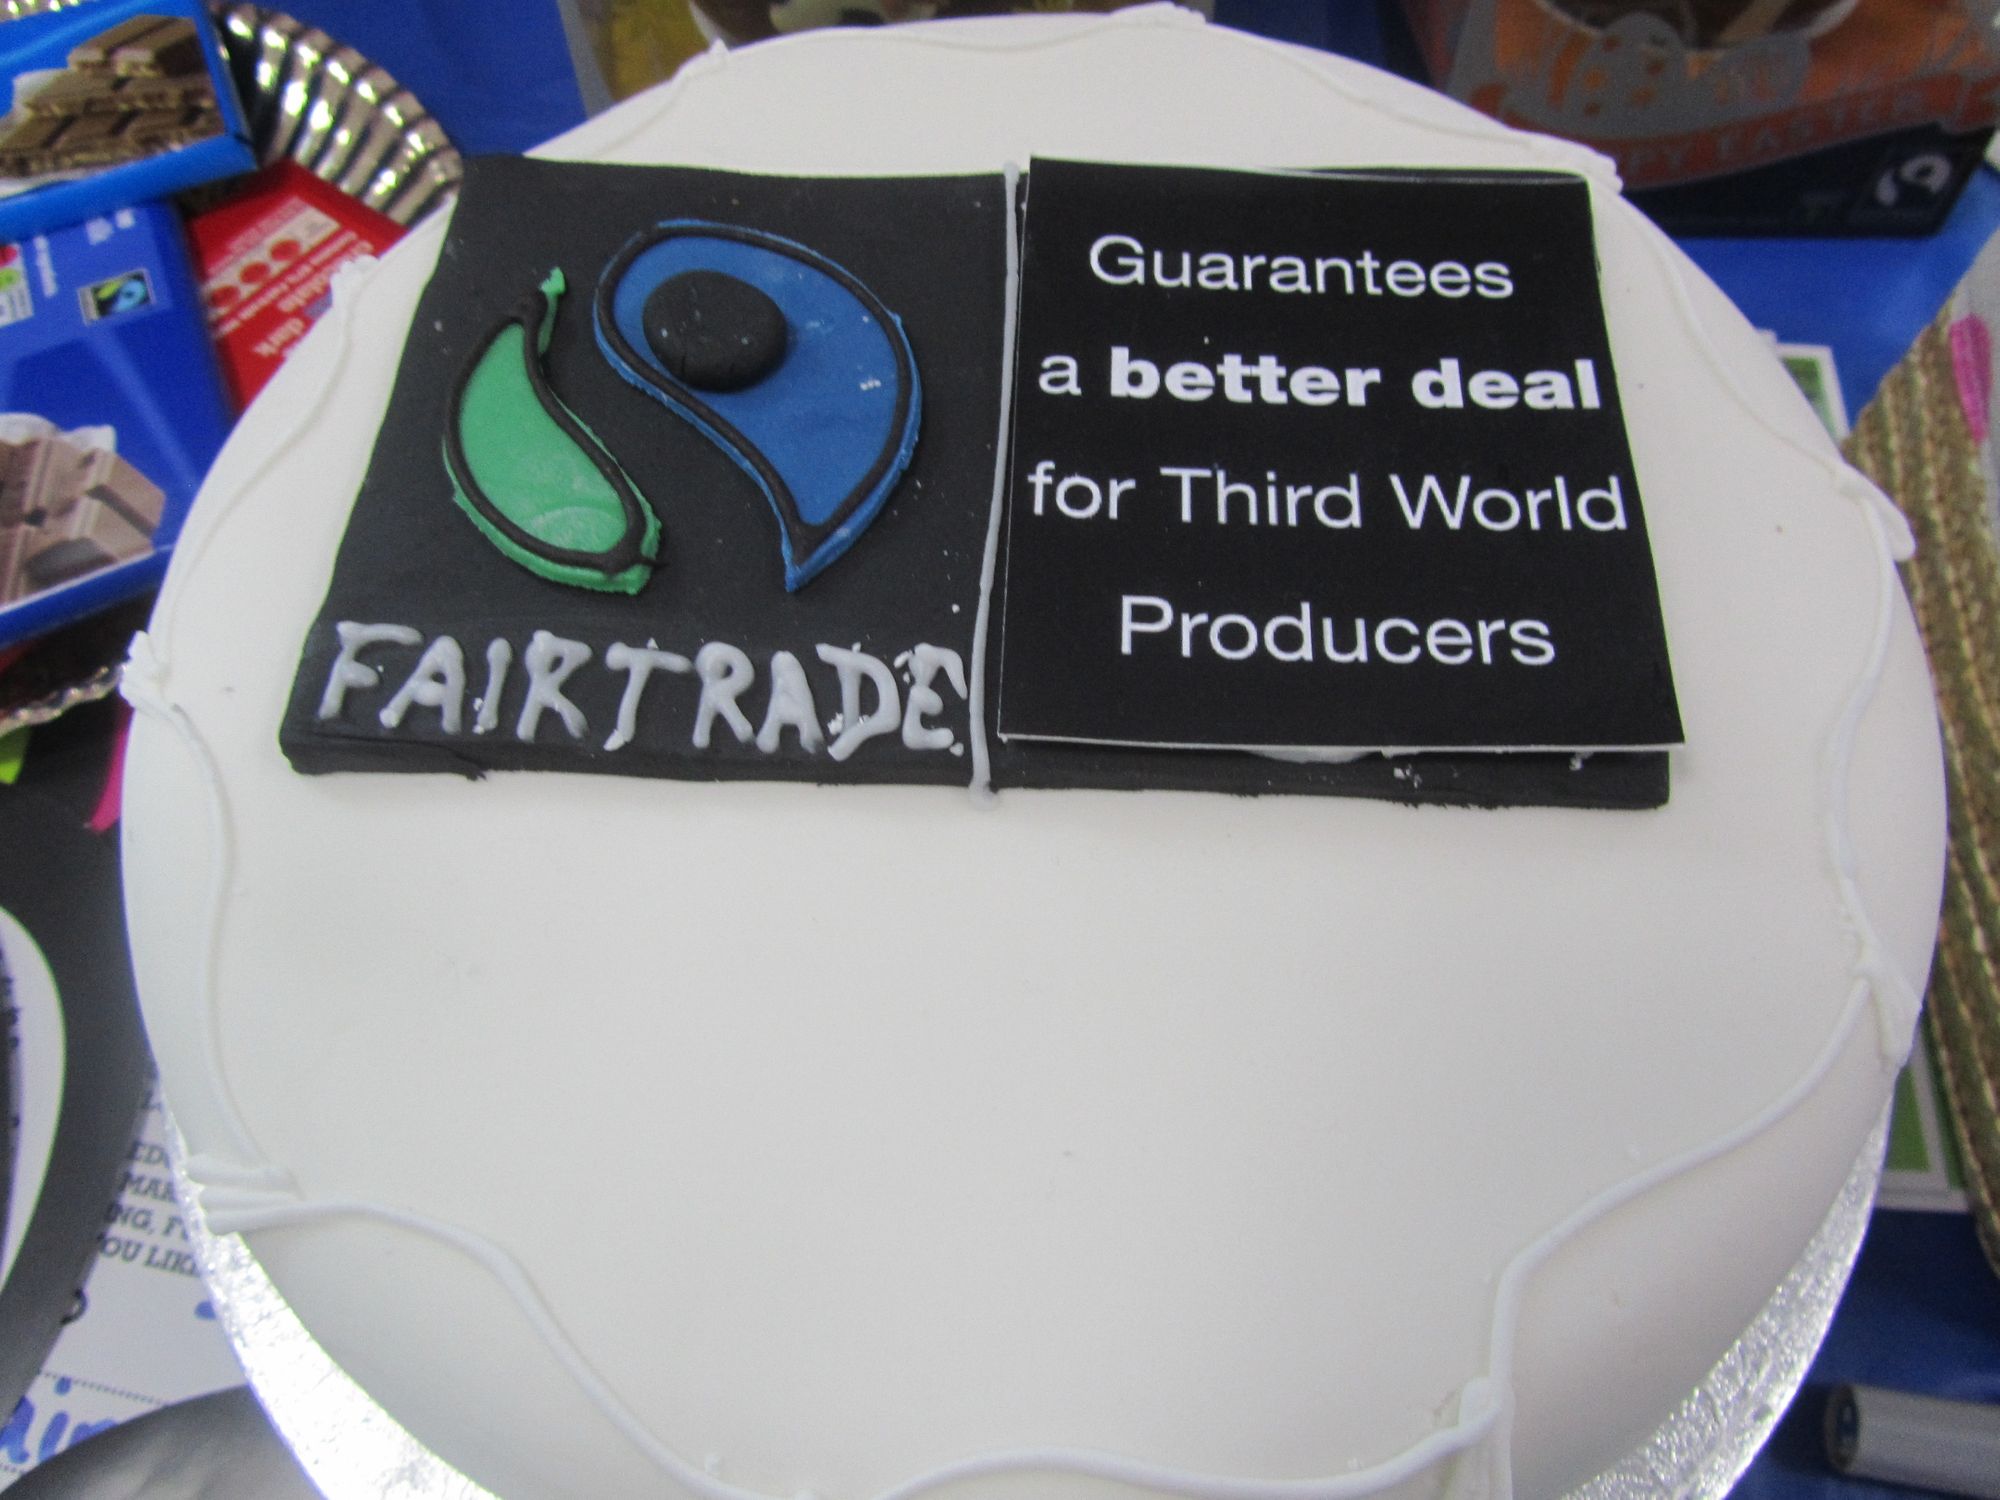 Celebrating 25 years of fairtrade and past events and activities